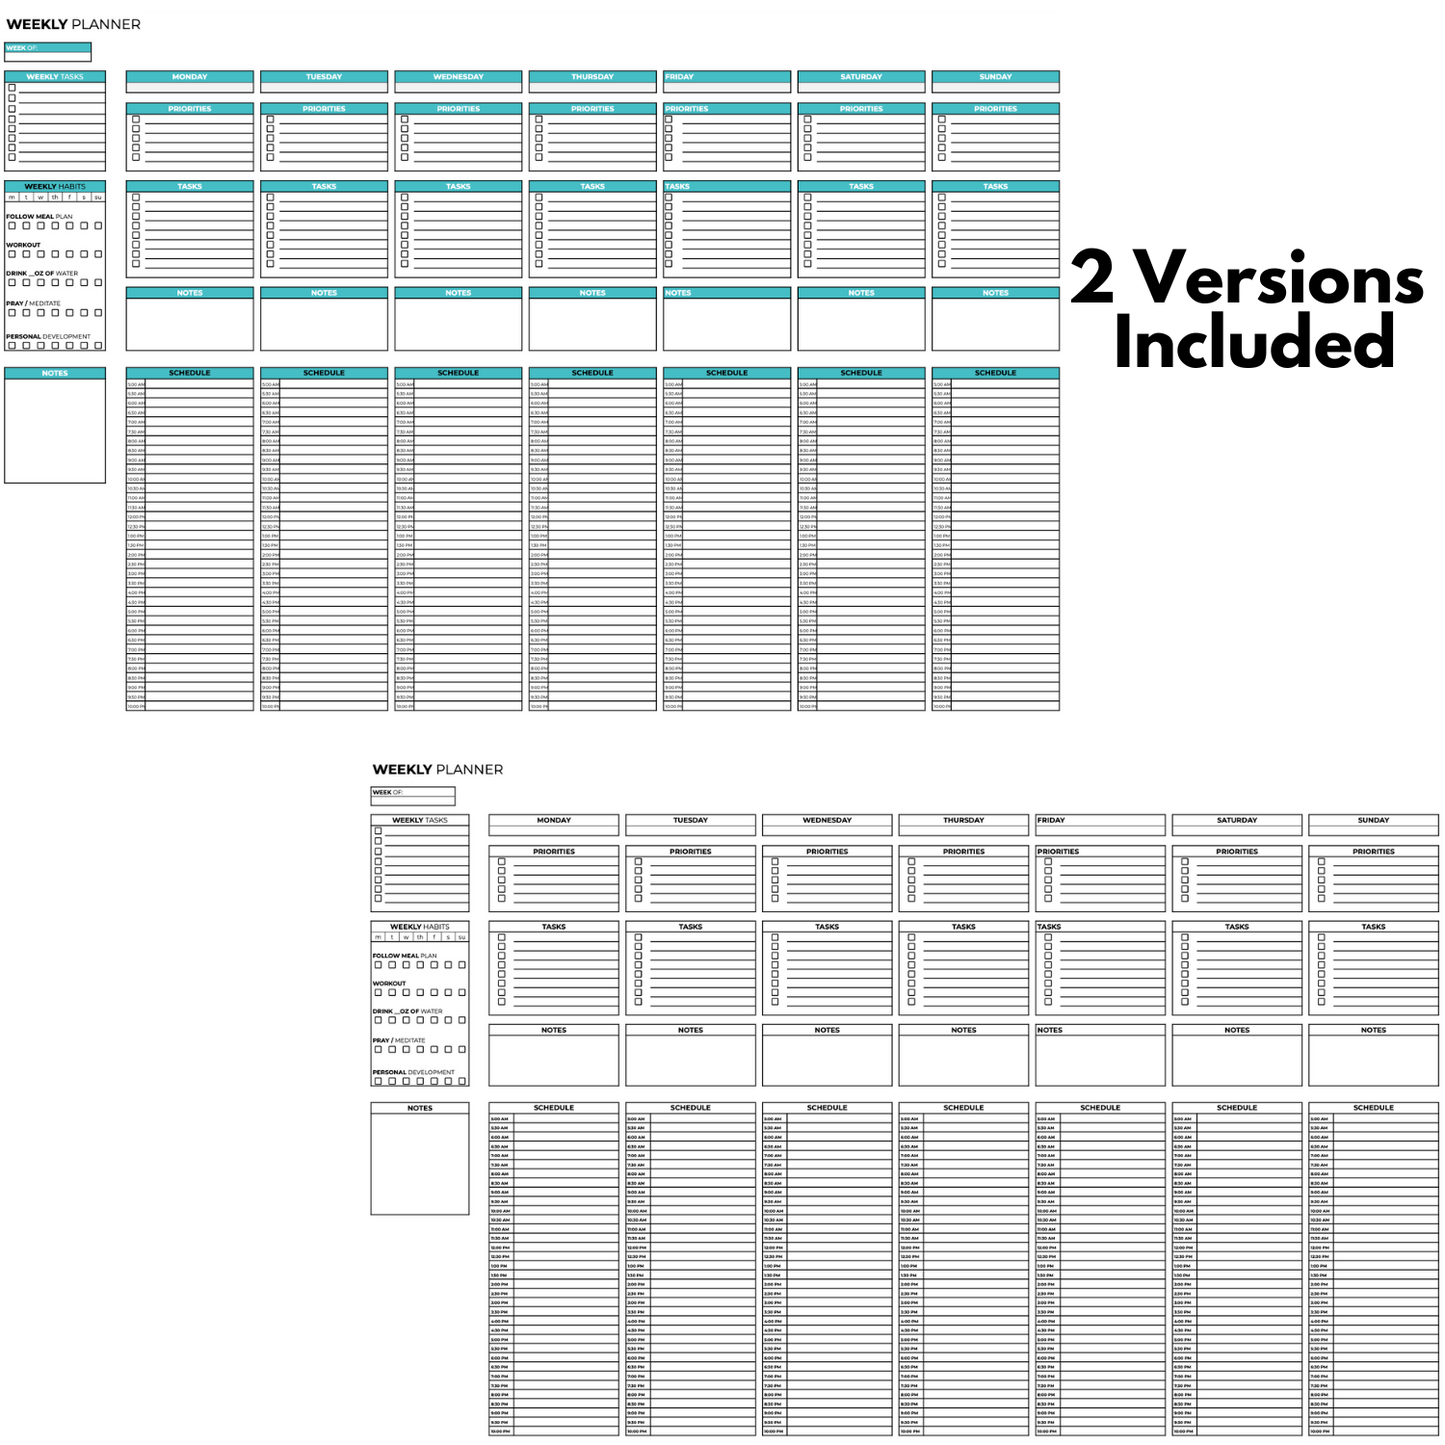 a color and black and white copy of the weekly planner spreadsheet